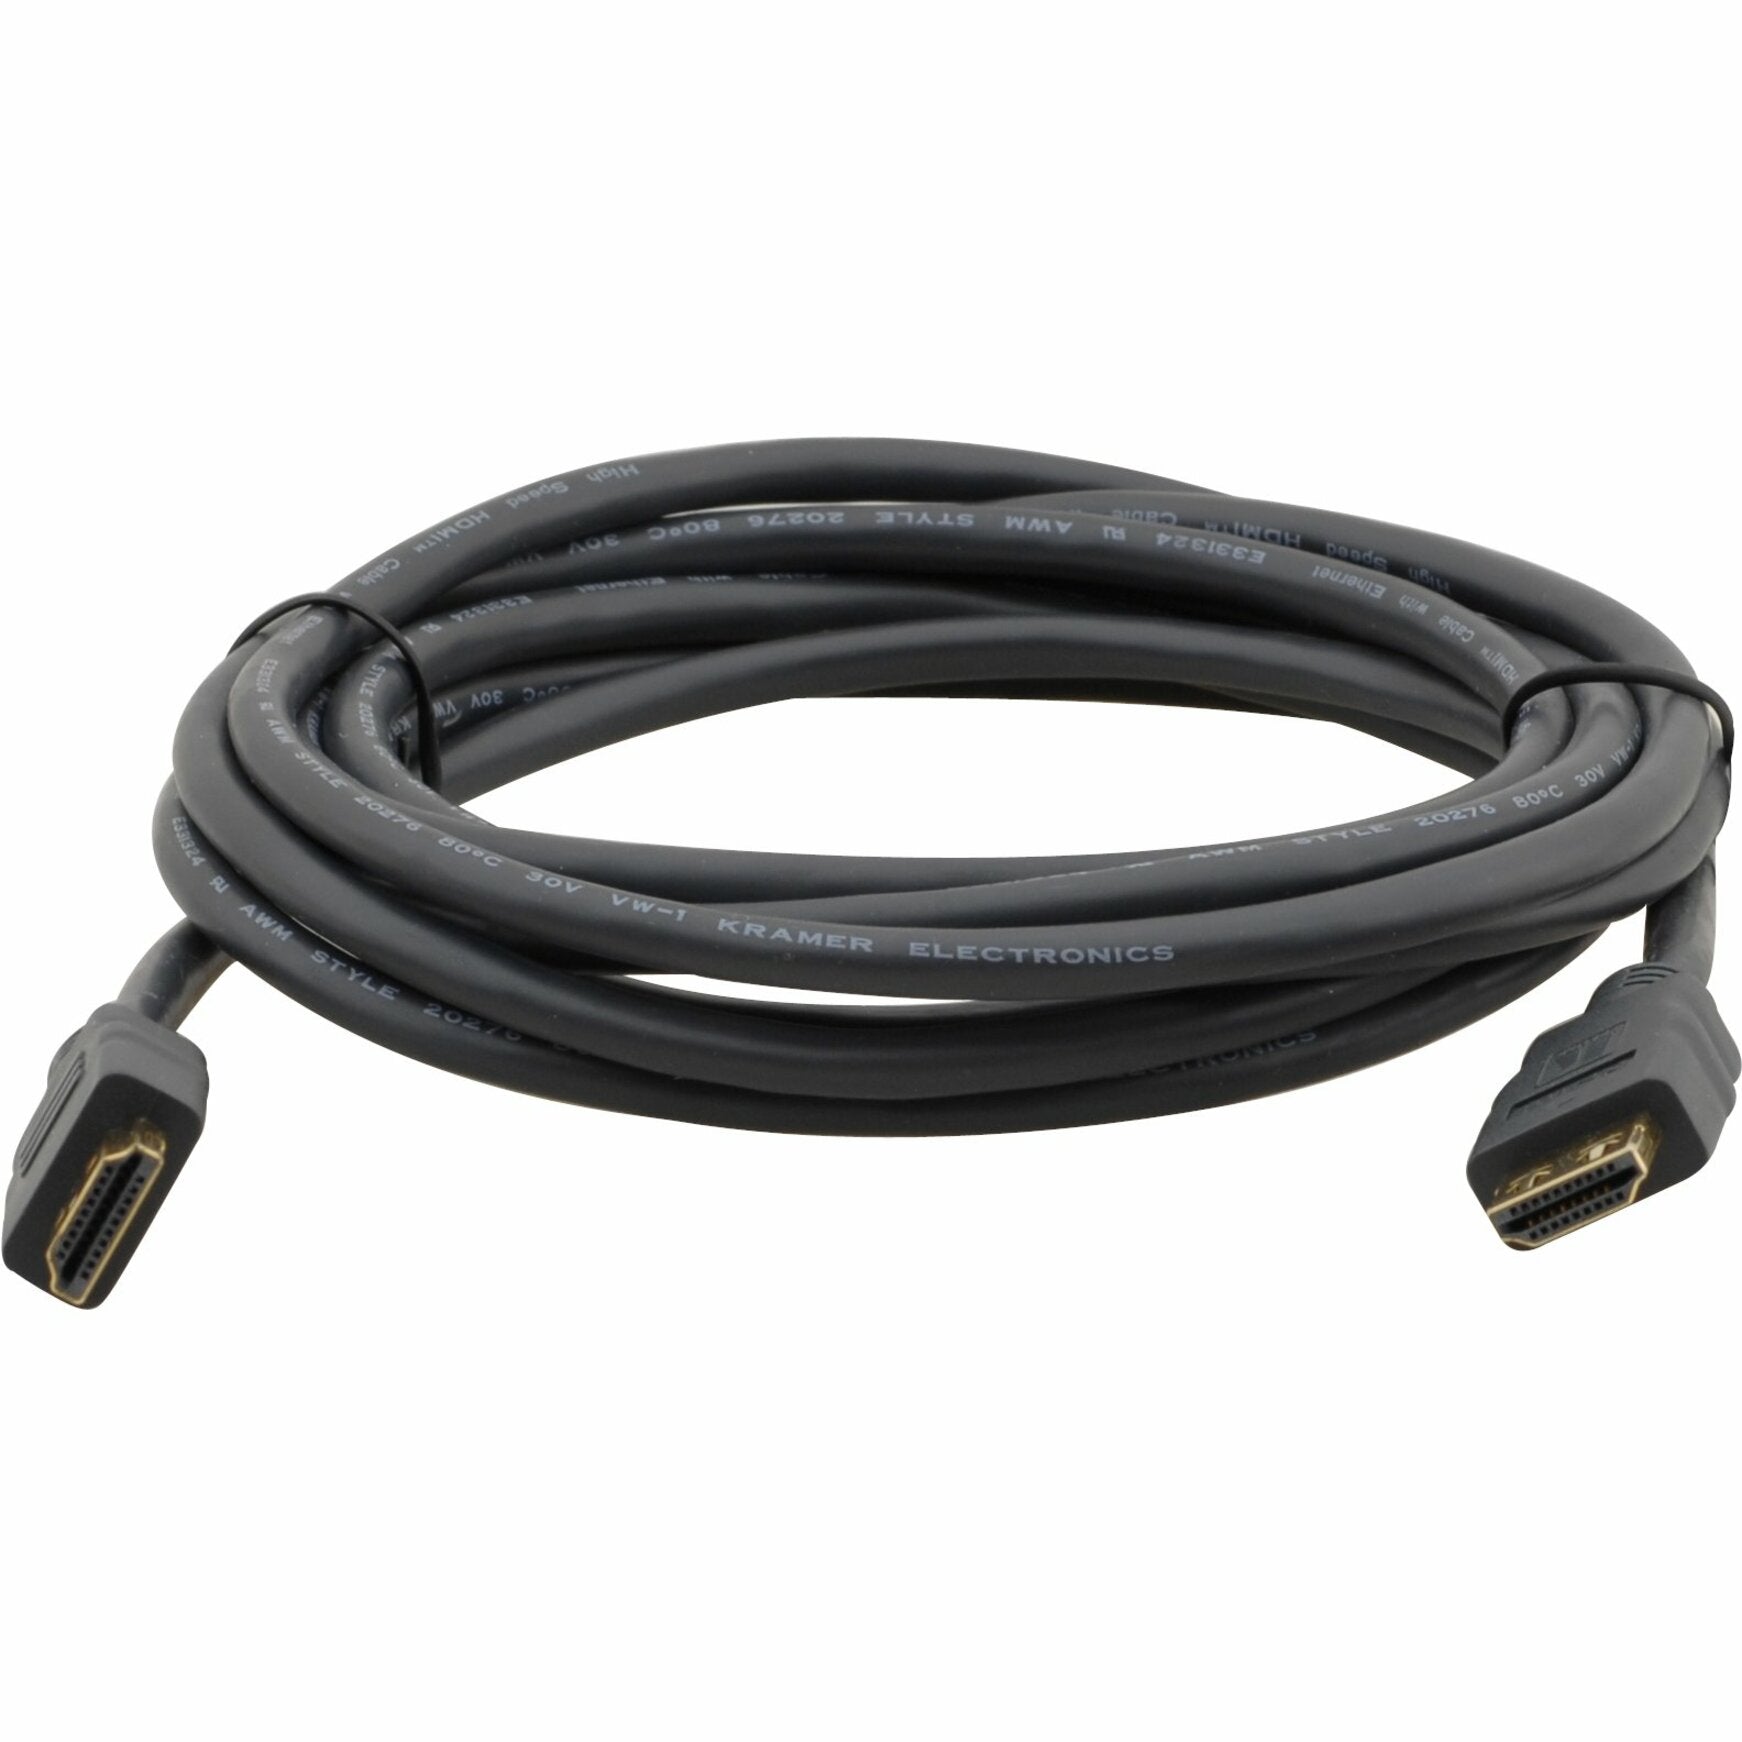 Kramer C-MHM/MHM-15 Flexible High-Speed HDMI Cable with Ethernet, 15 ft - Molded Copper Conductor